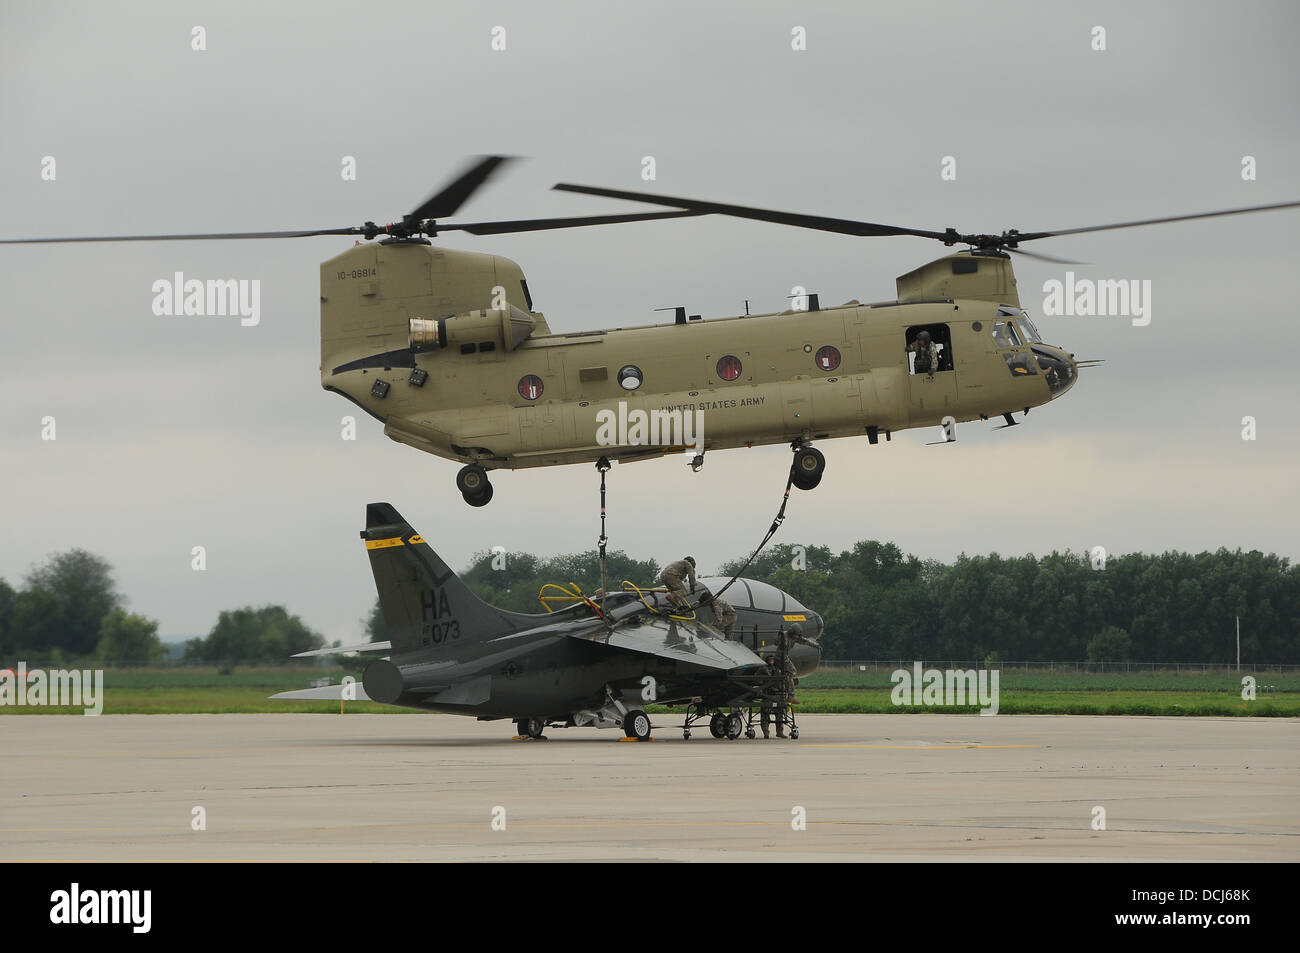 A CH-47F Chinook Helicopter from the Iowa Army National Guard’s B-2-211 General Support Aviation Battalion (GSAB) from Davenport, Iowa lifts an A-7D Corsair at the 185th Air Refueling Wing in Sioux City, Iowa. The vintage Corsair is being brought to Camp Stock Photo